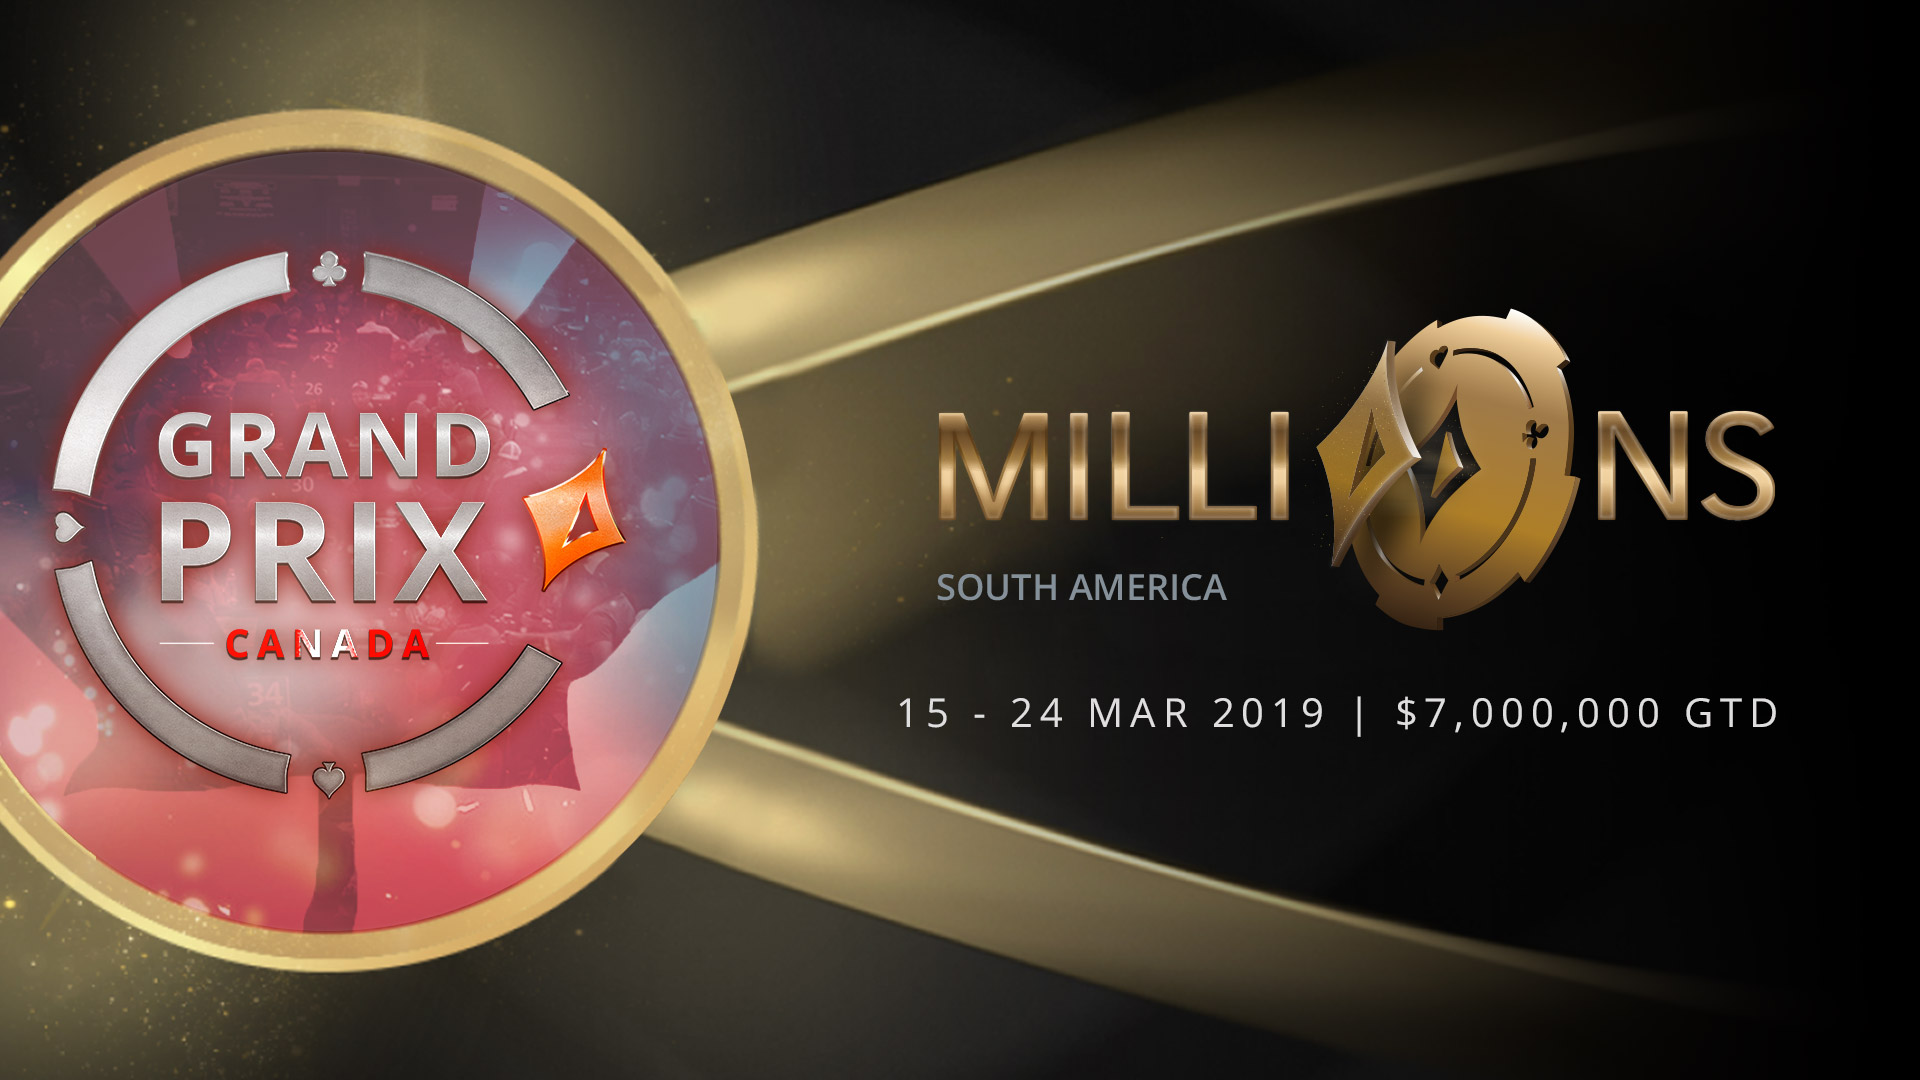 Win a FREE $12K package to MILLIONS South America